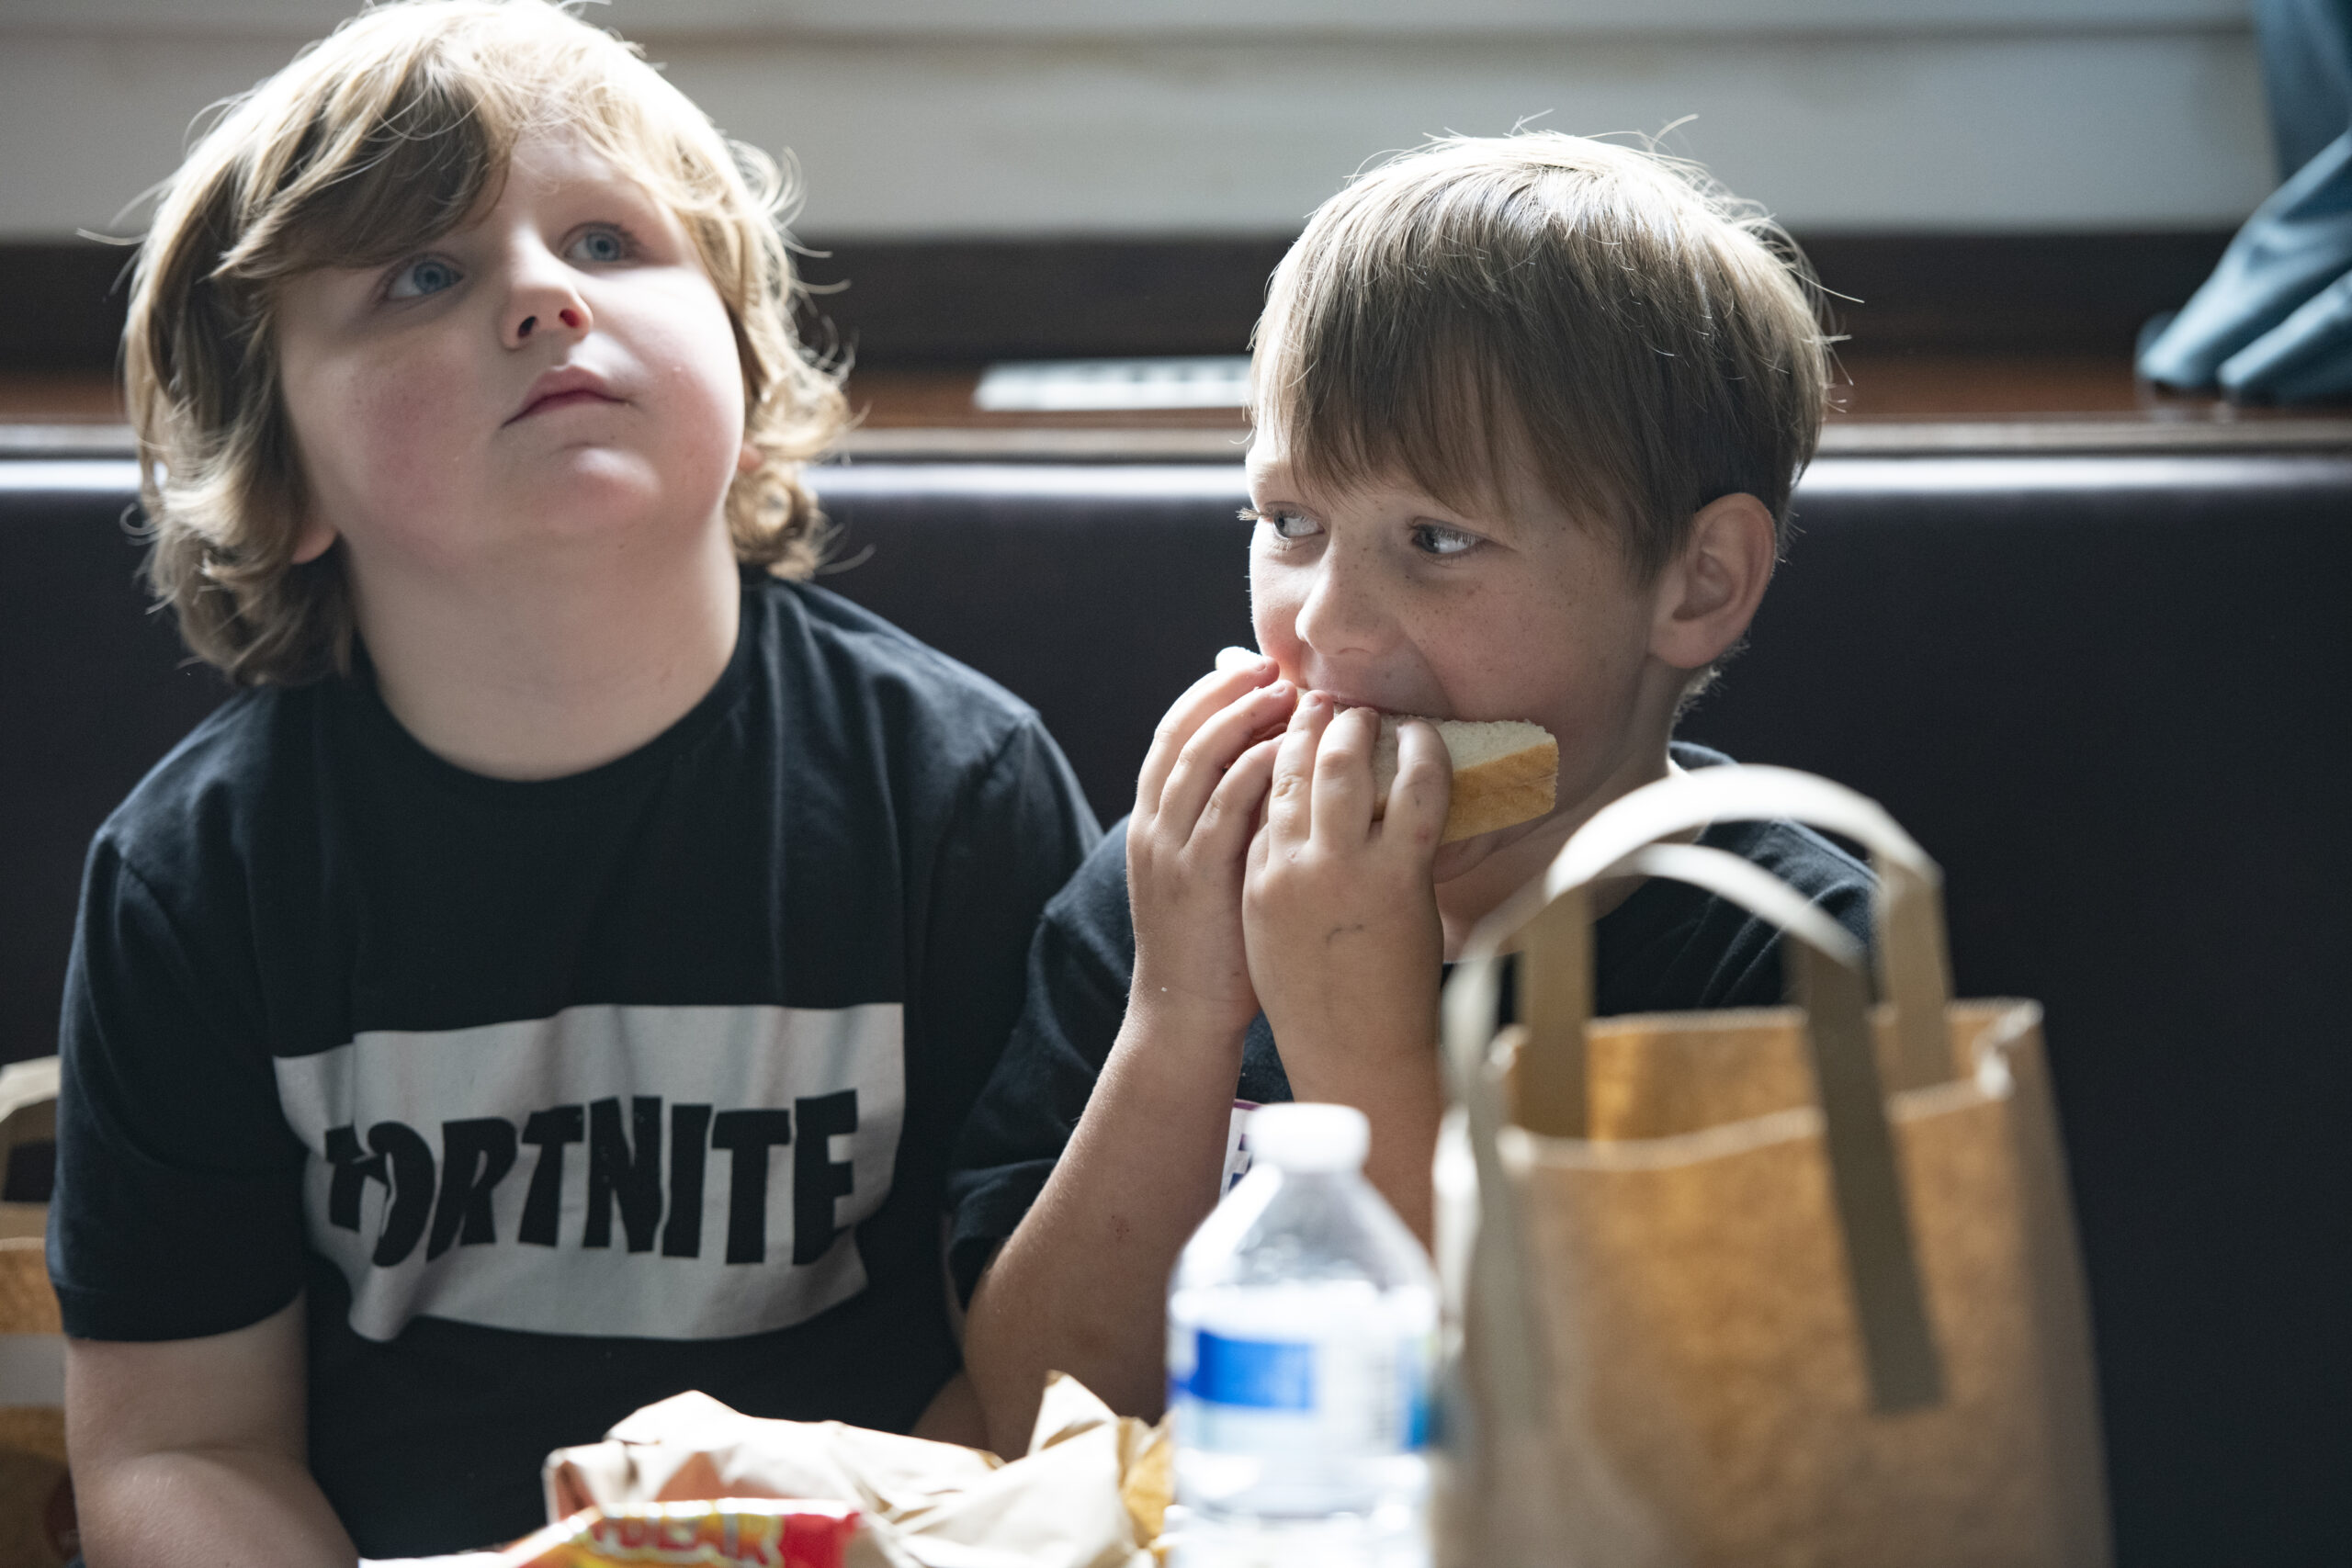 Two young boys eating lunch